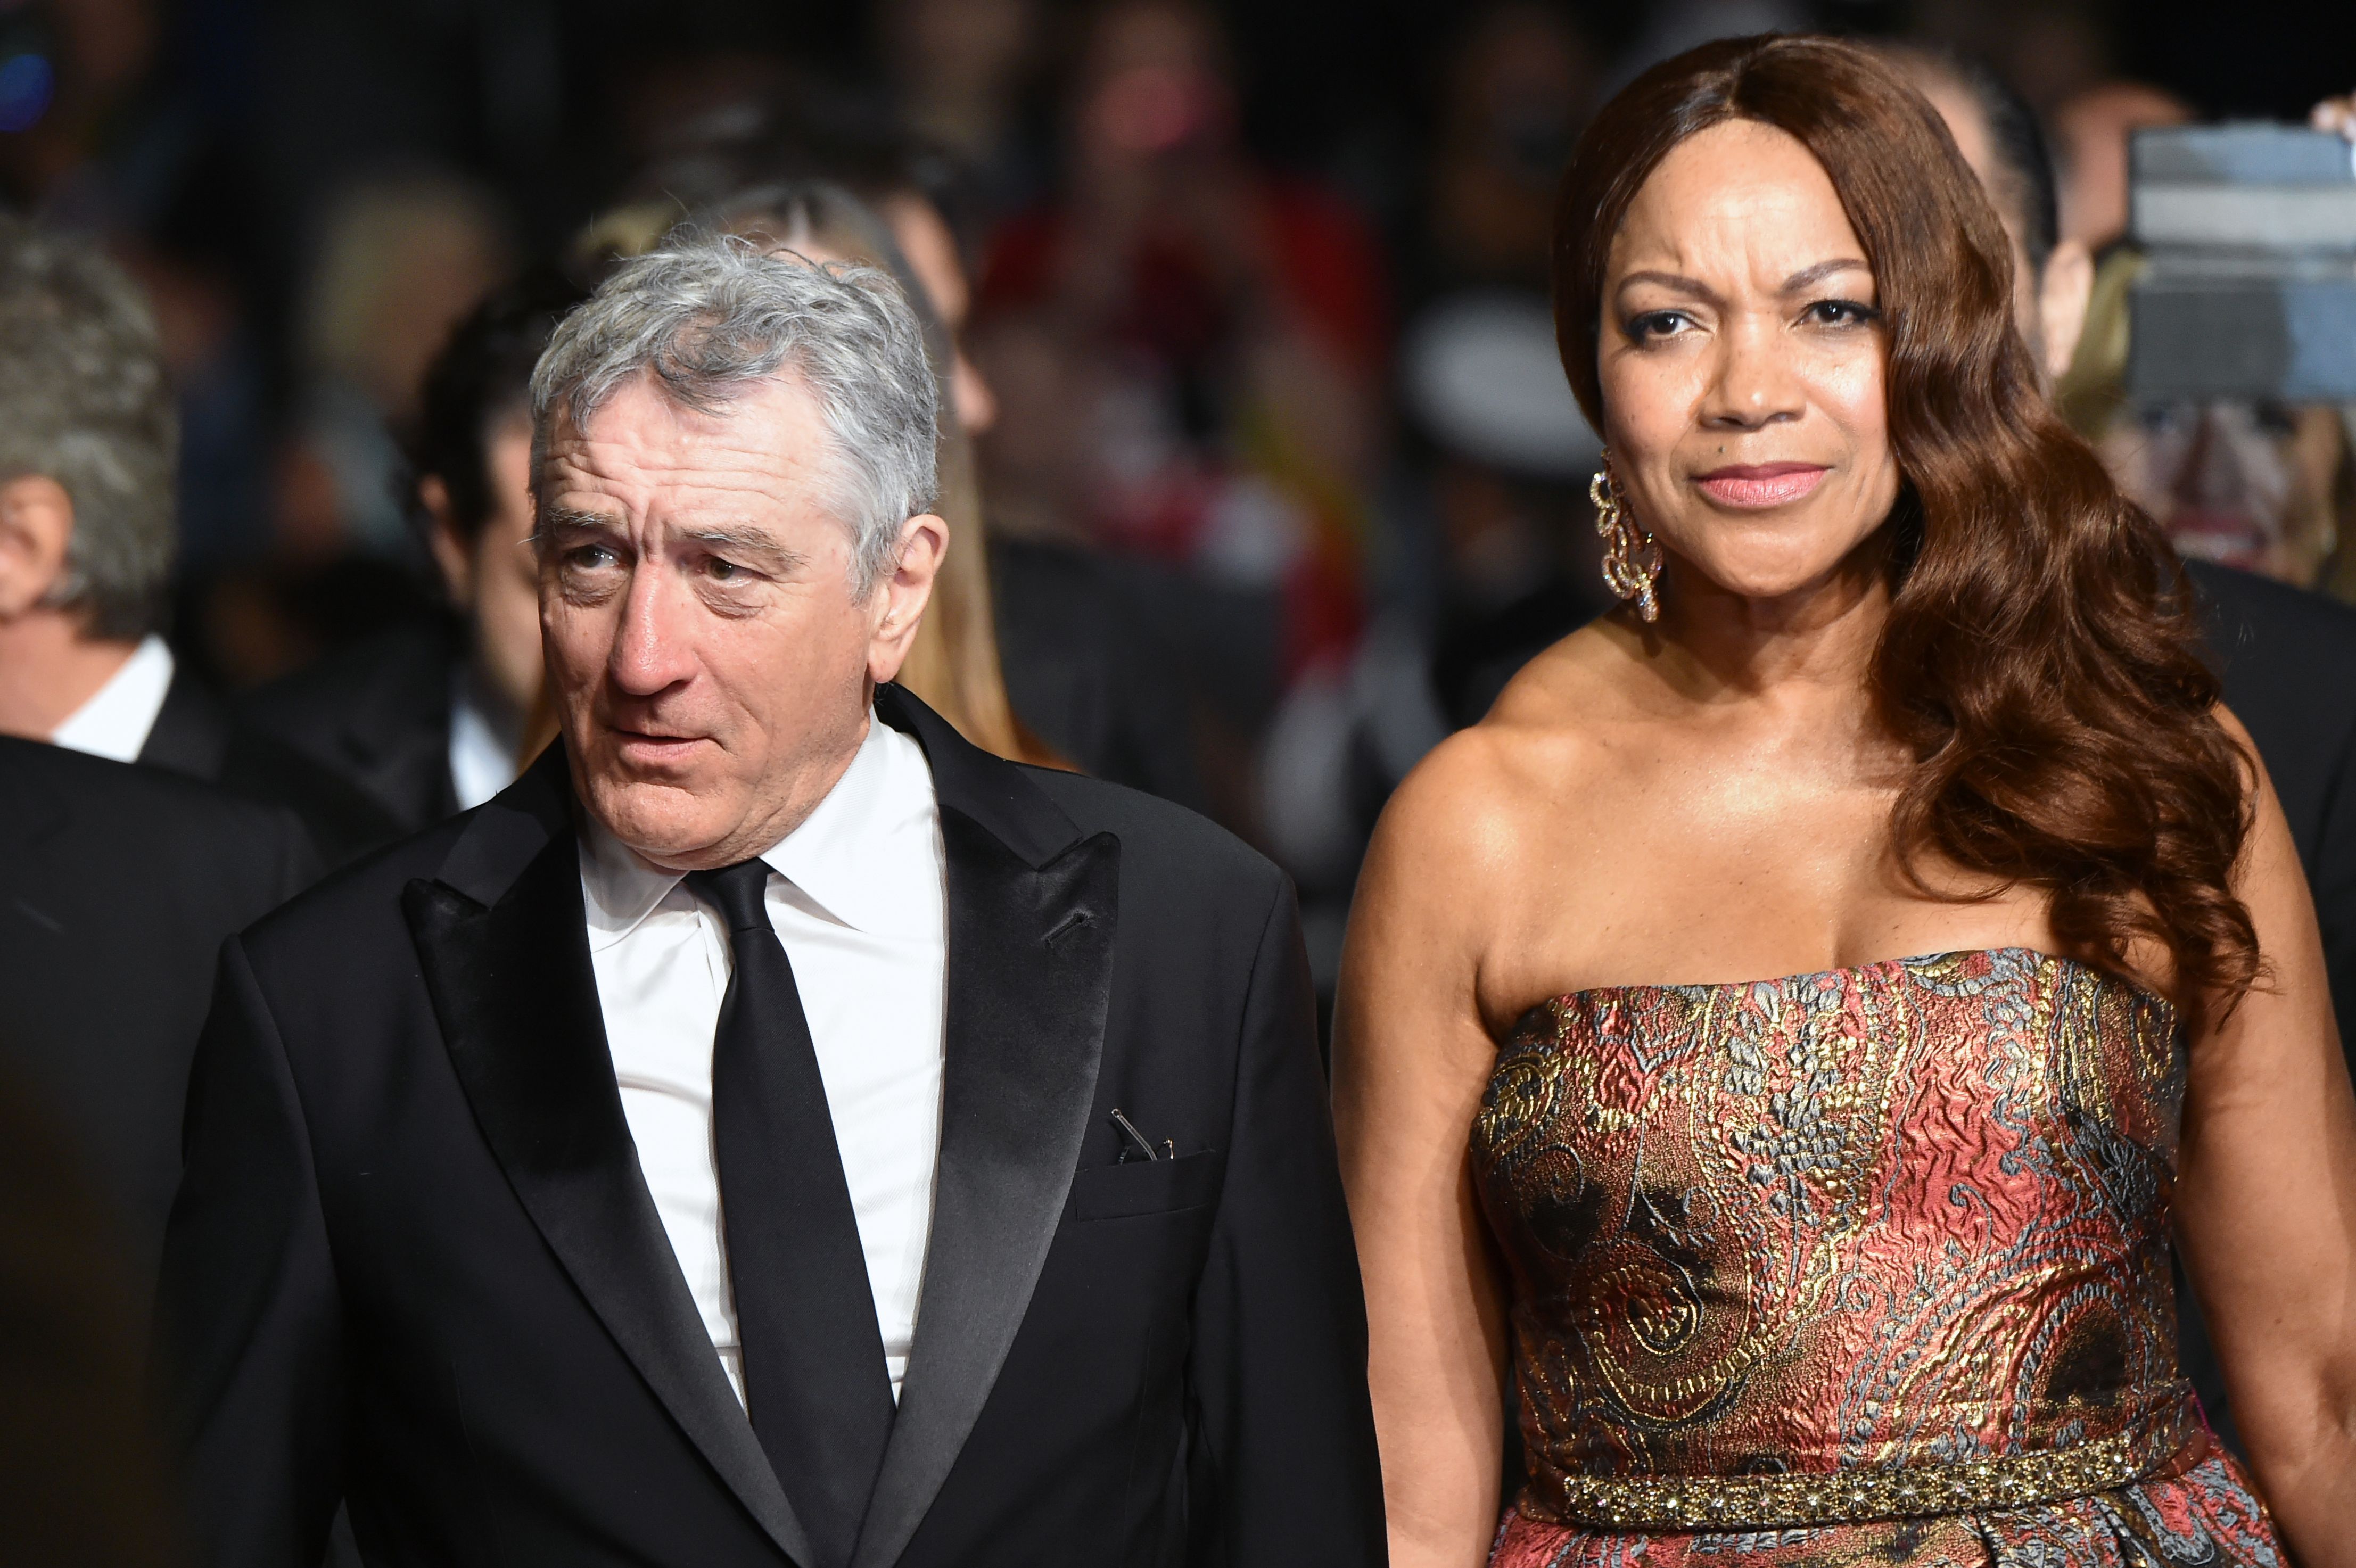 Robert De Niro and Grace Hightower reportedly call it quits after 21